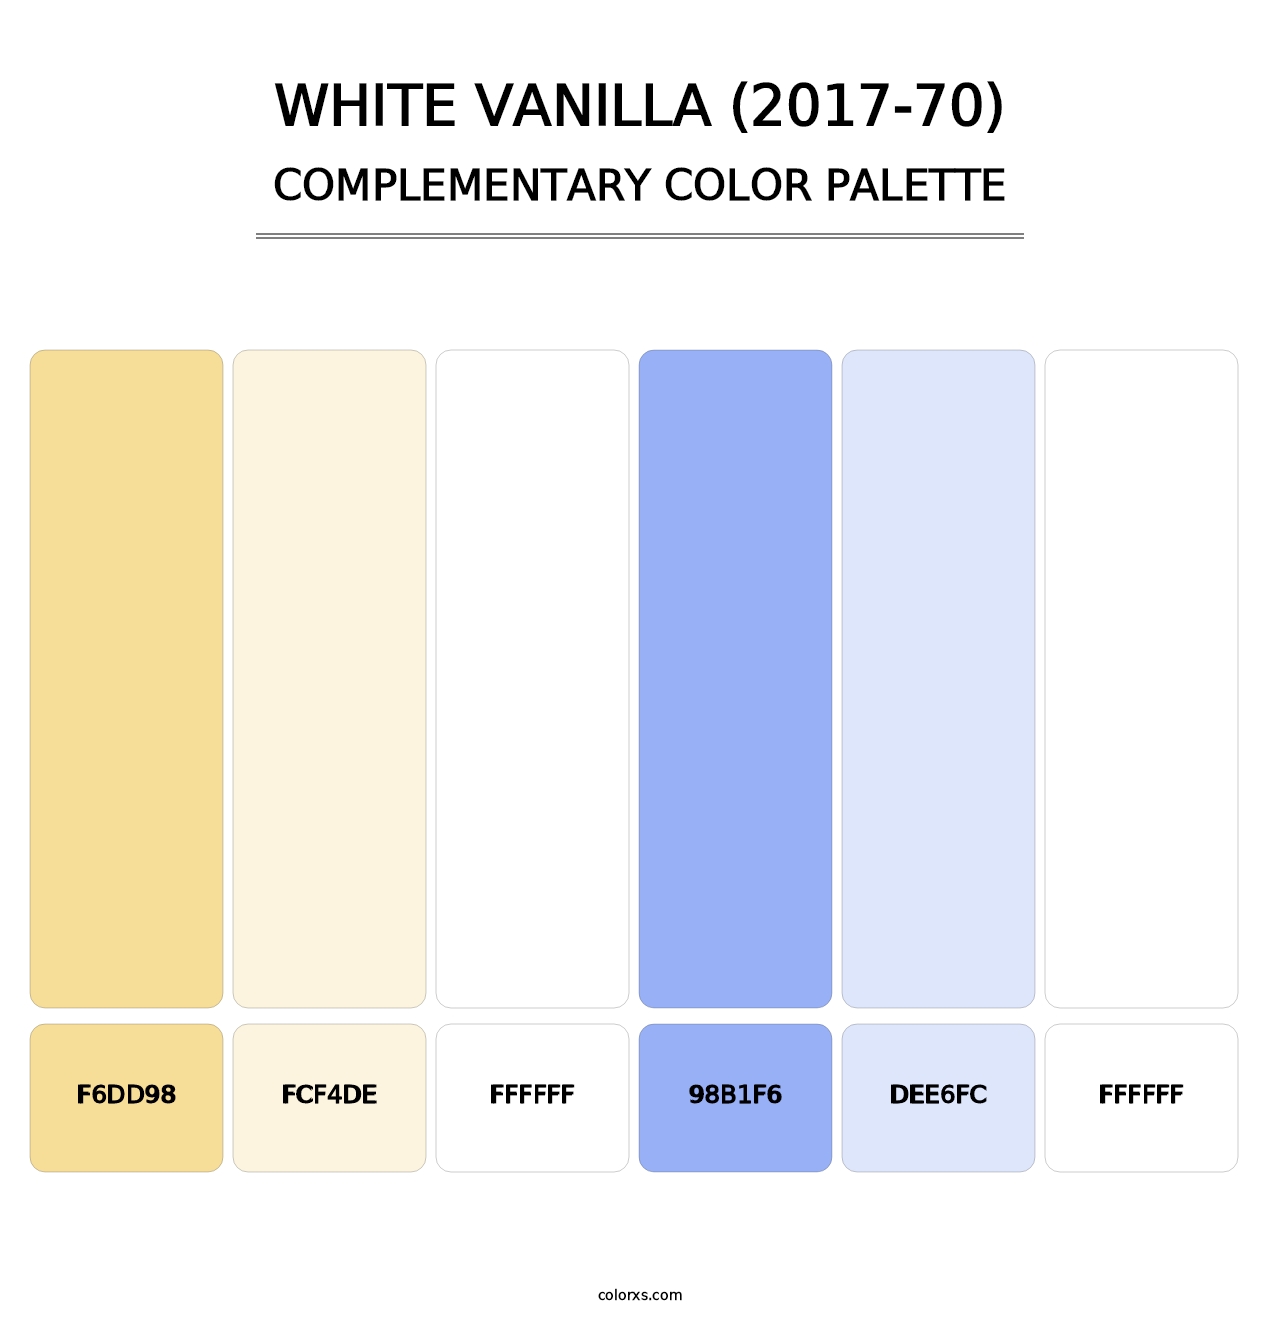 White Vanilla (2017-70) - Complementary Color Palette